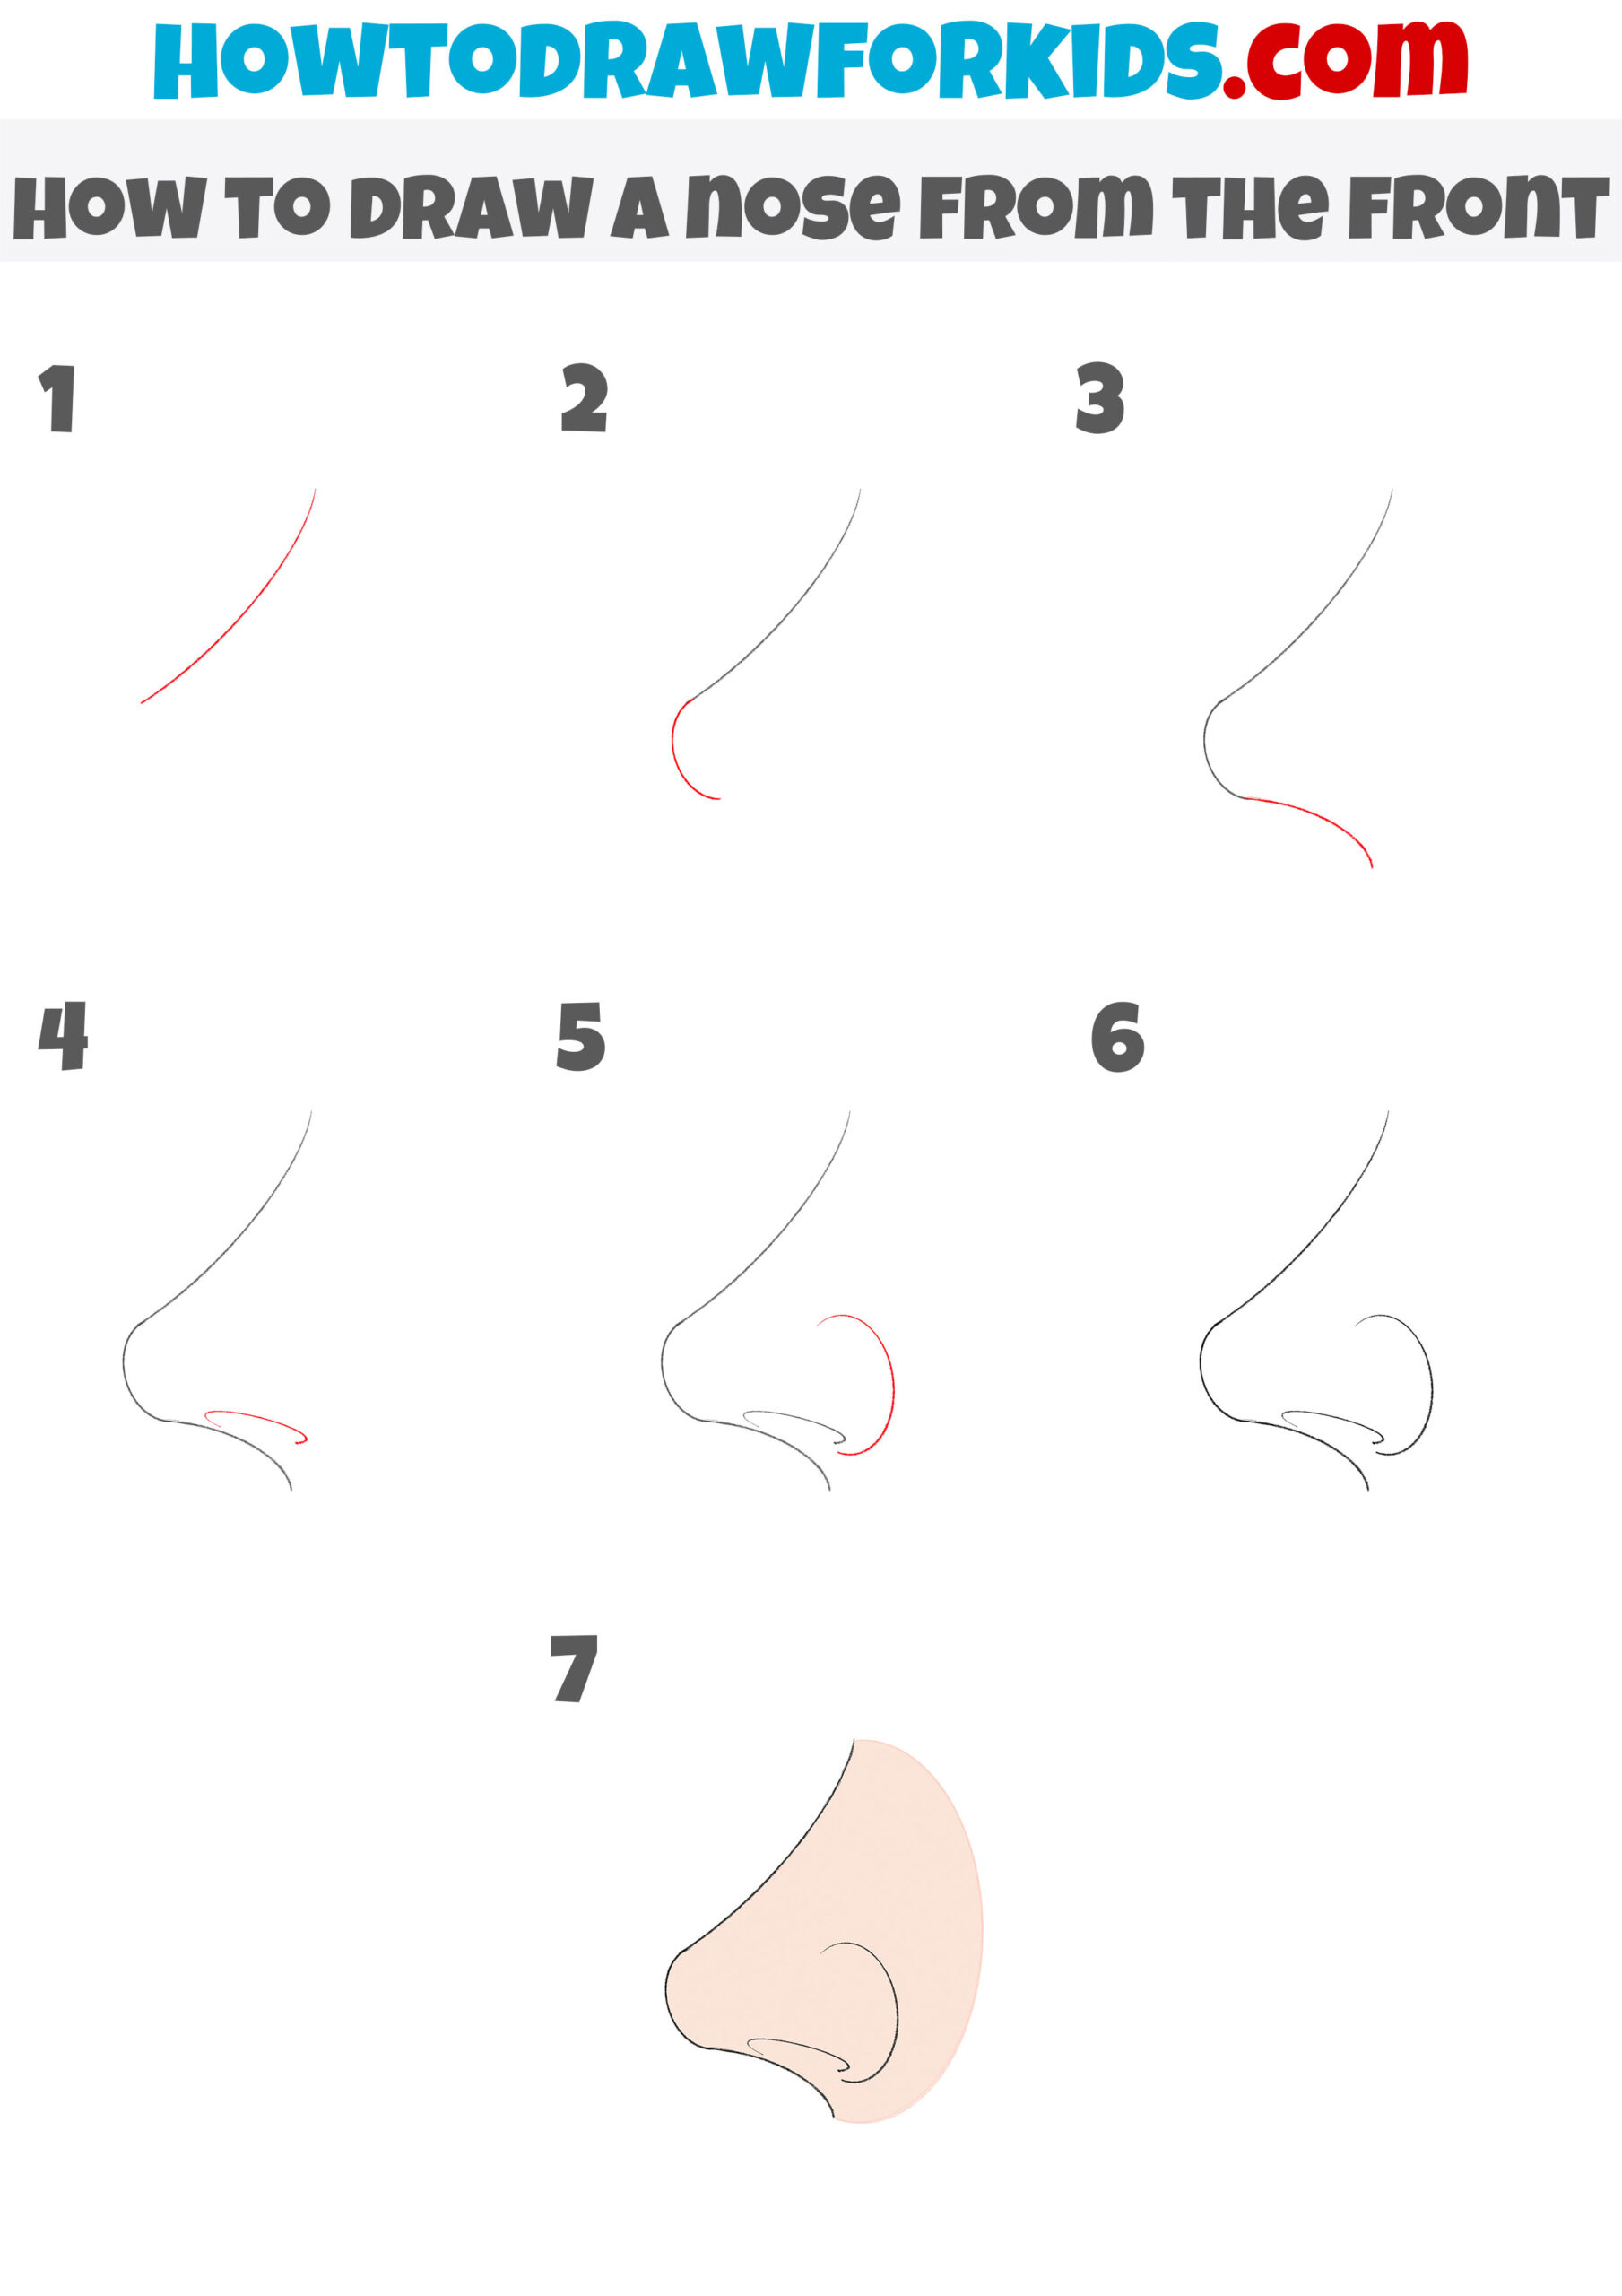 how to draw a nose from the front step by step